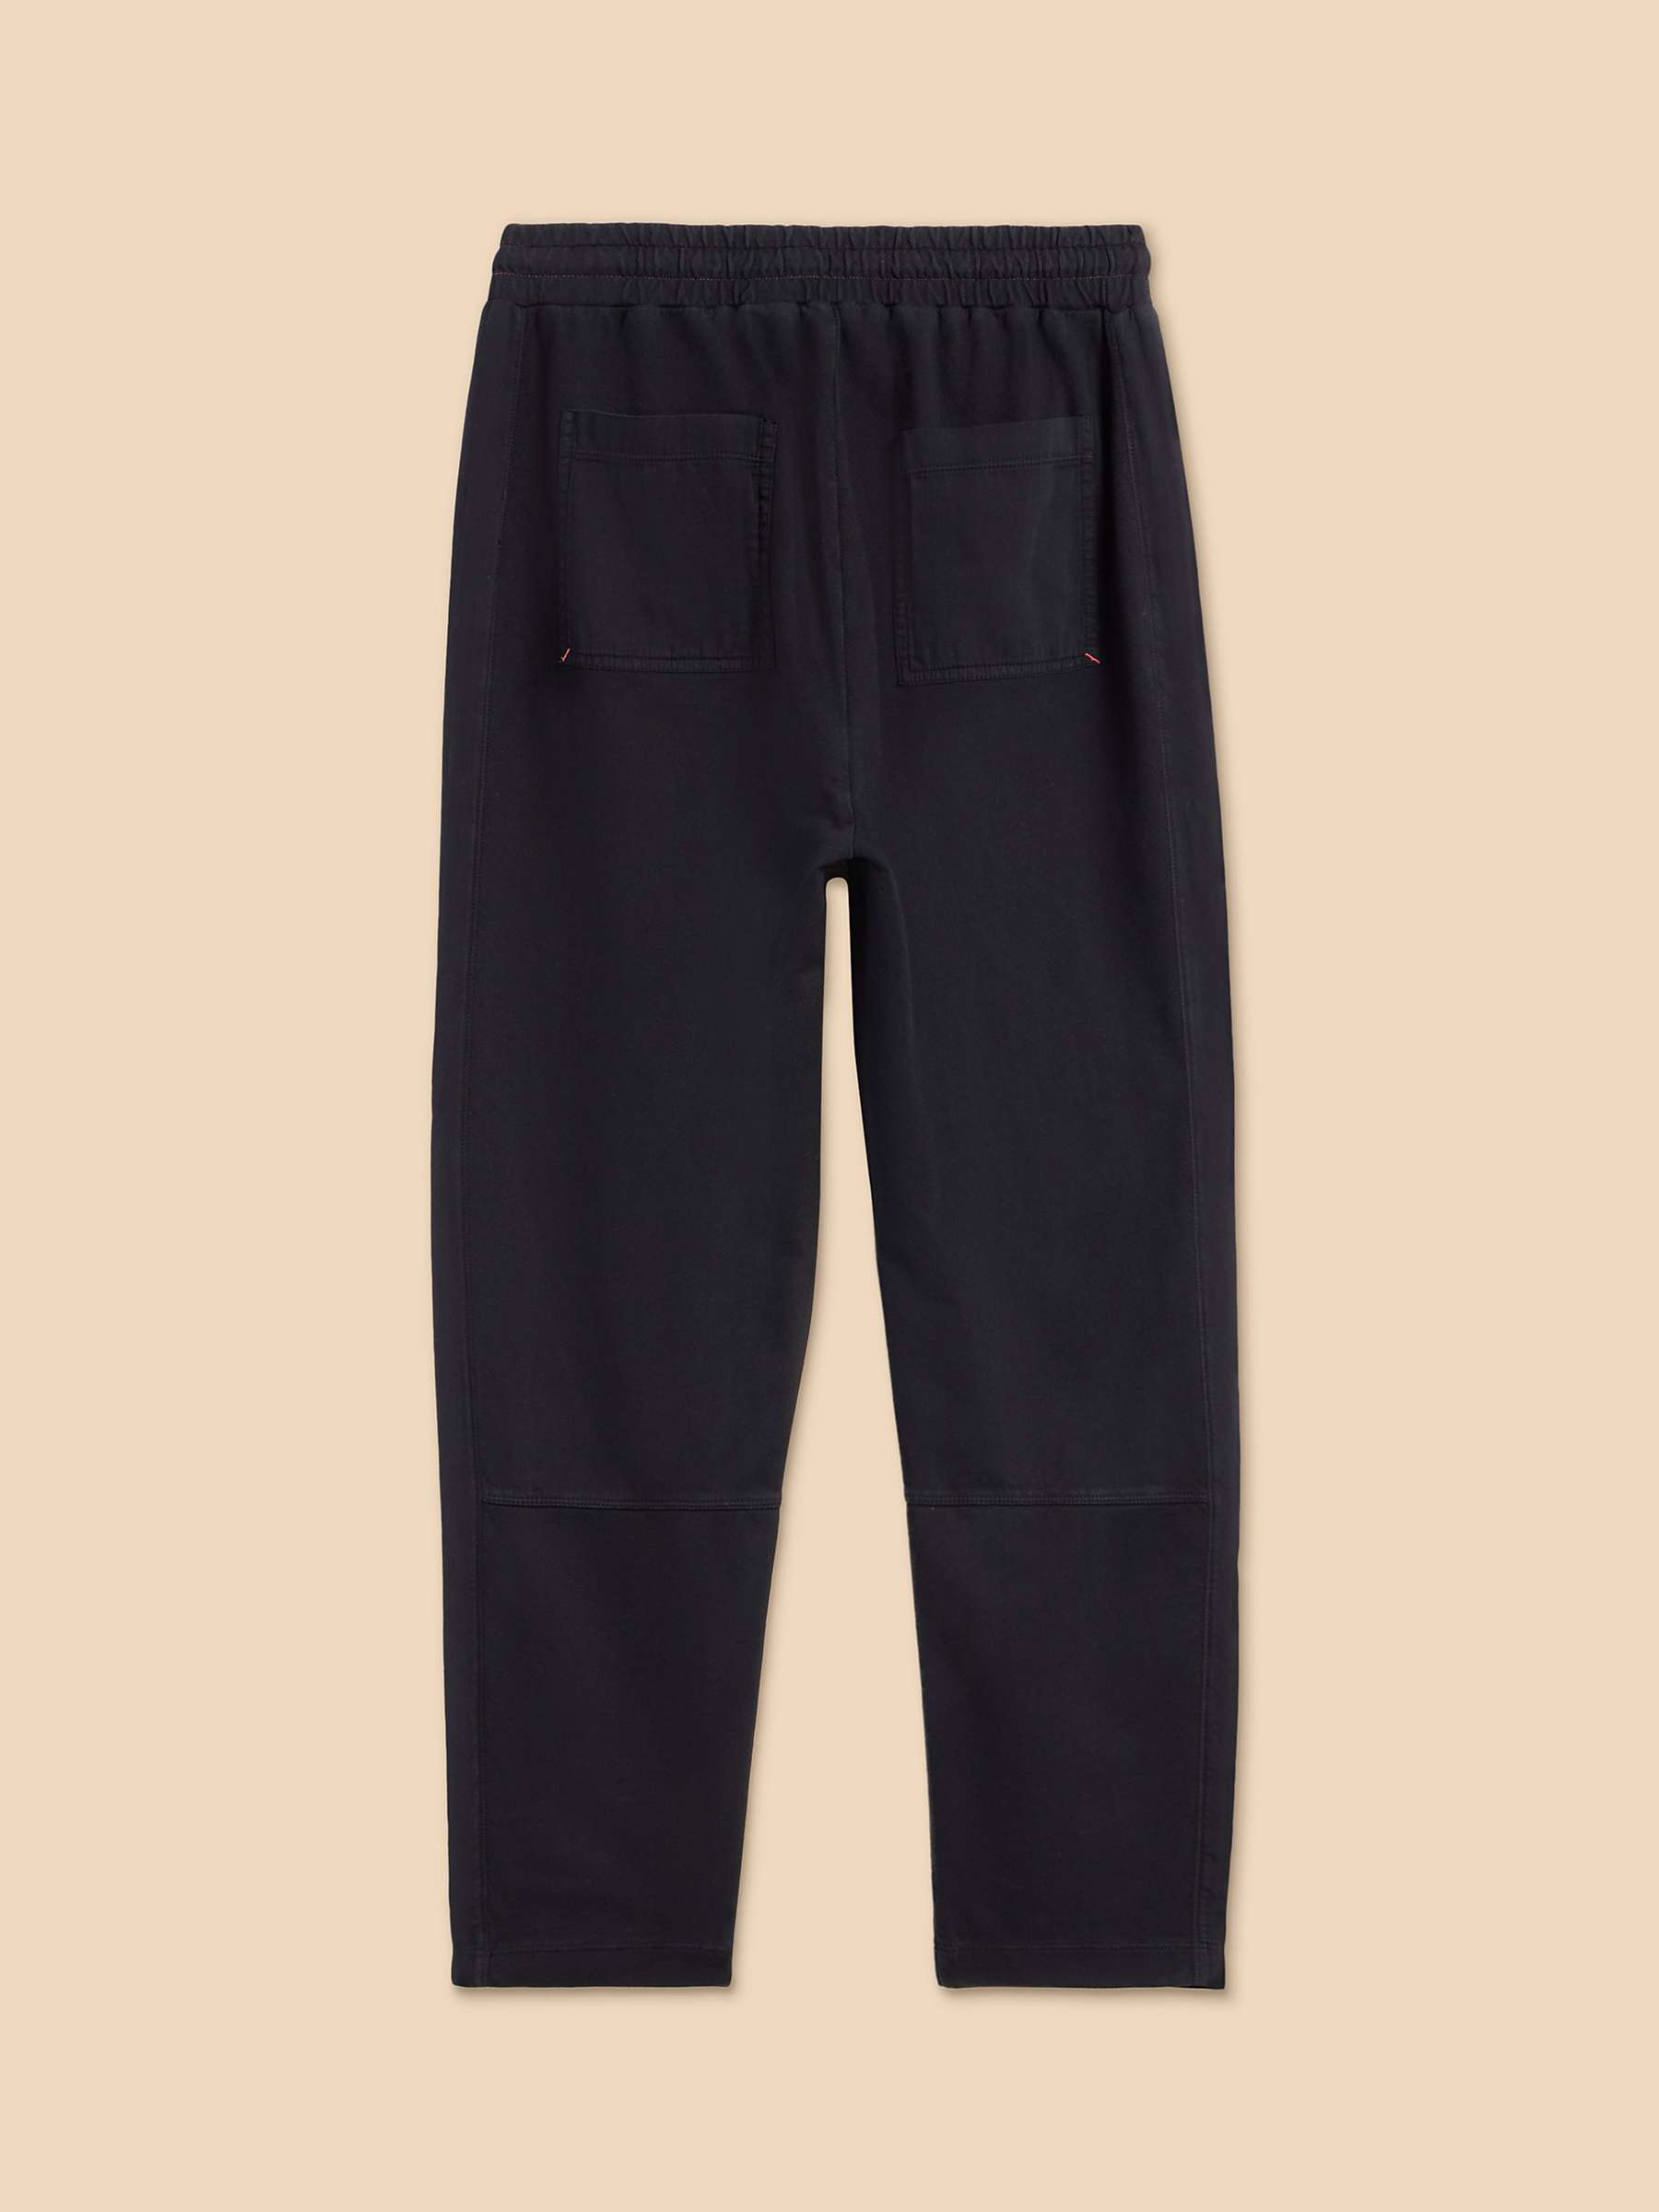 Buy White Stuff Ava Jersey Joggers Online at johnlewis.com